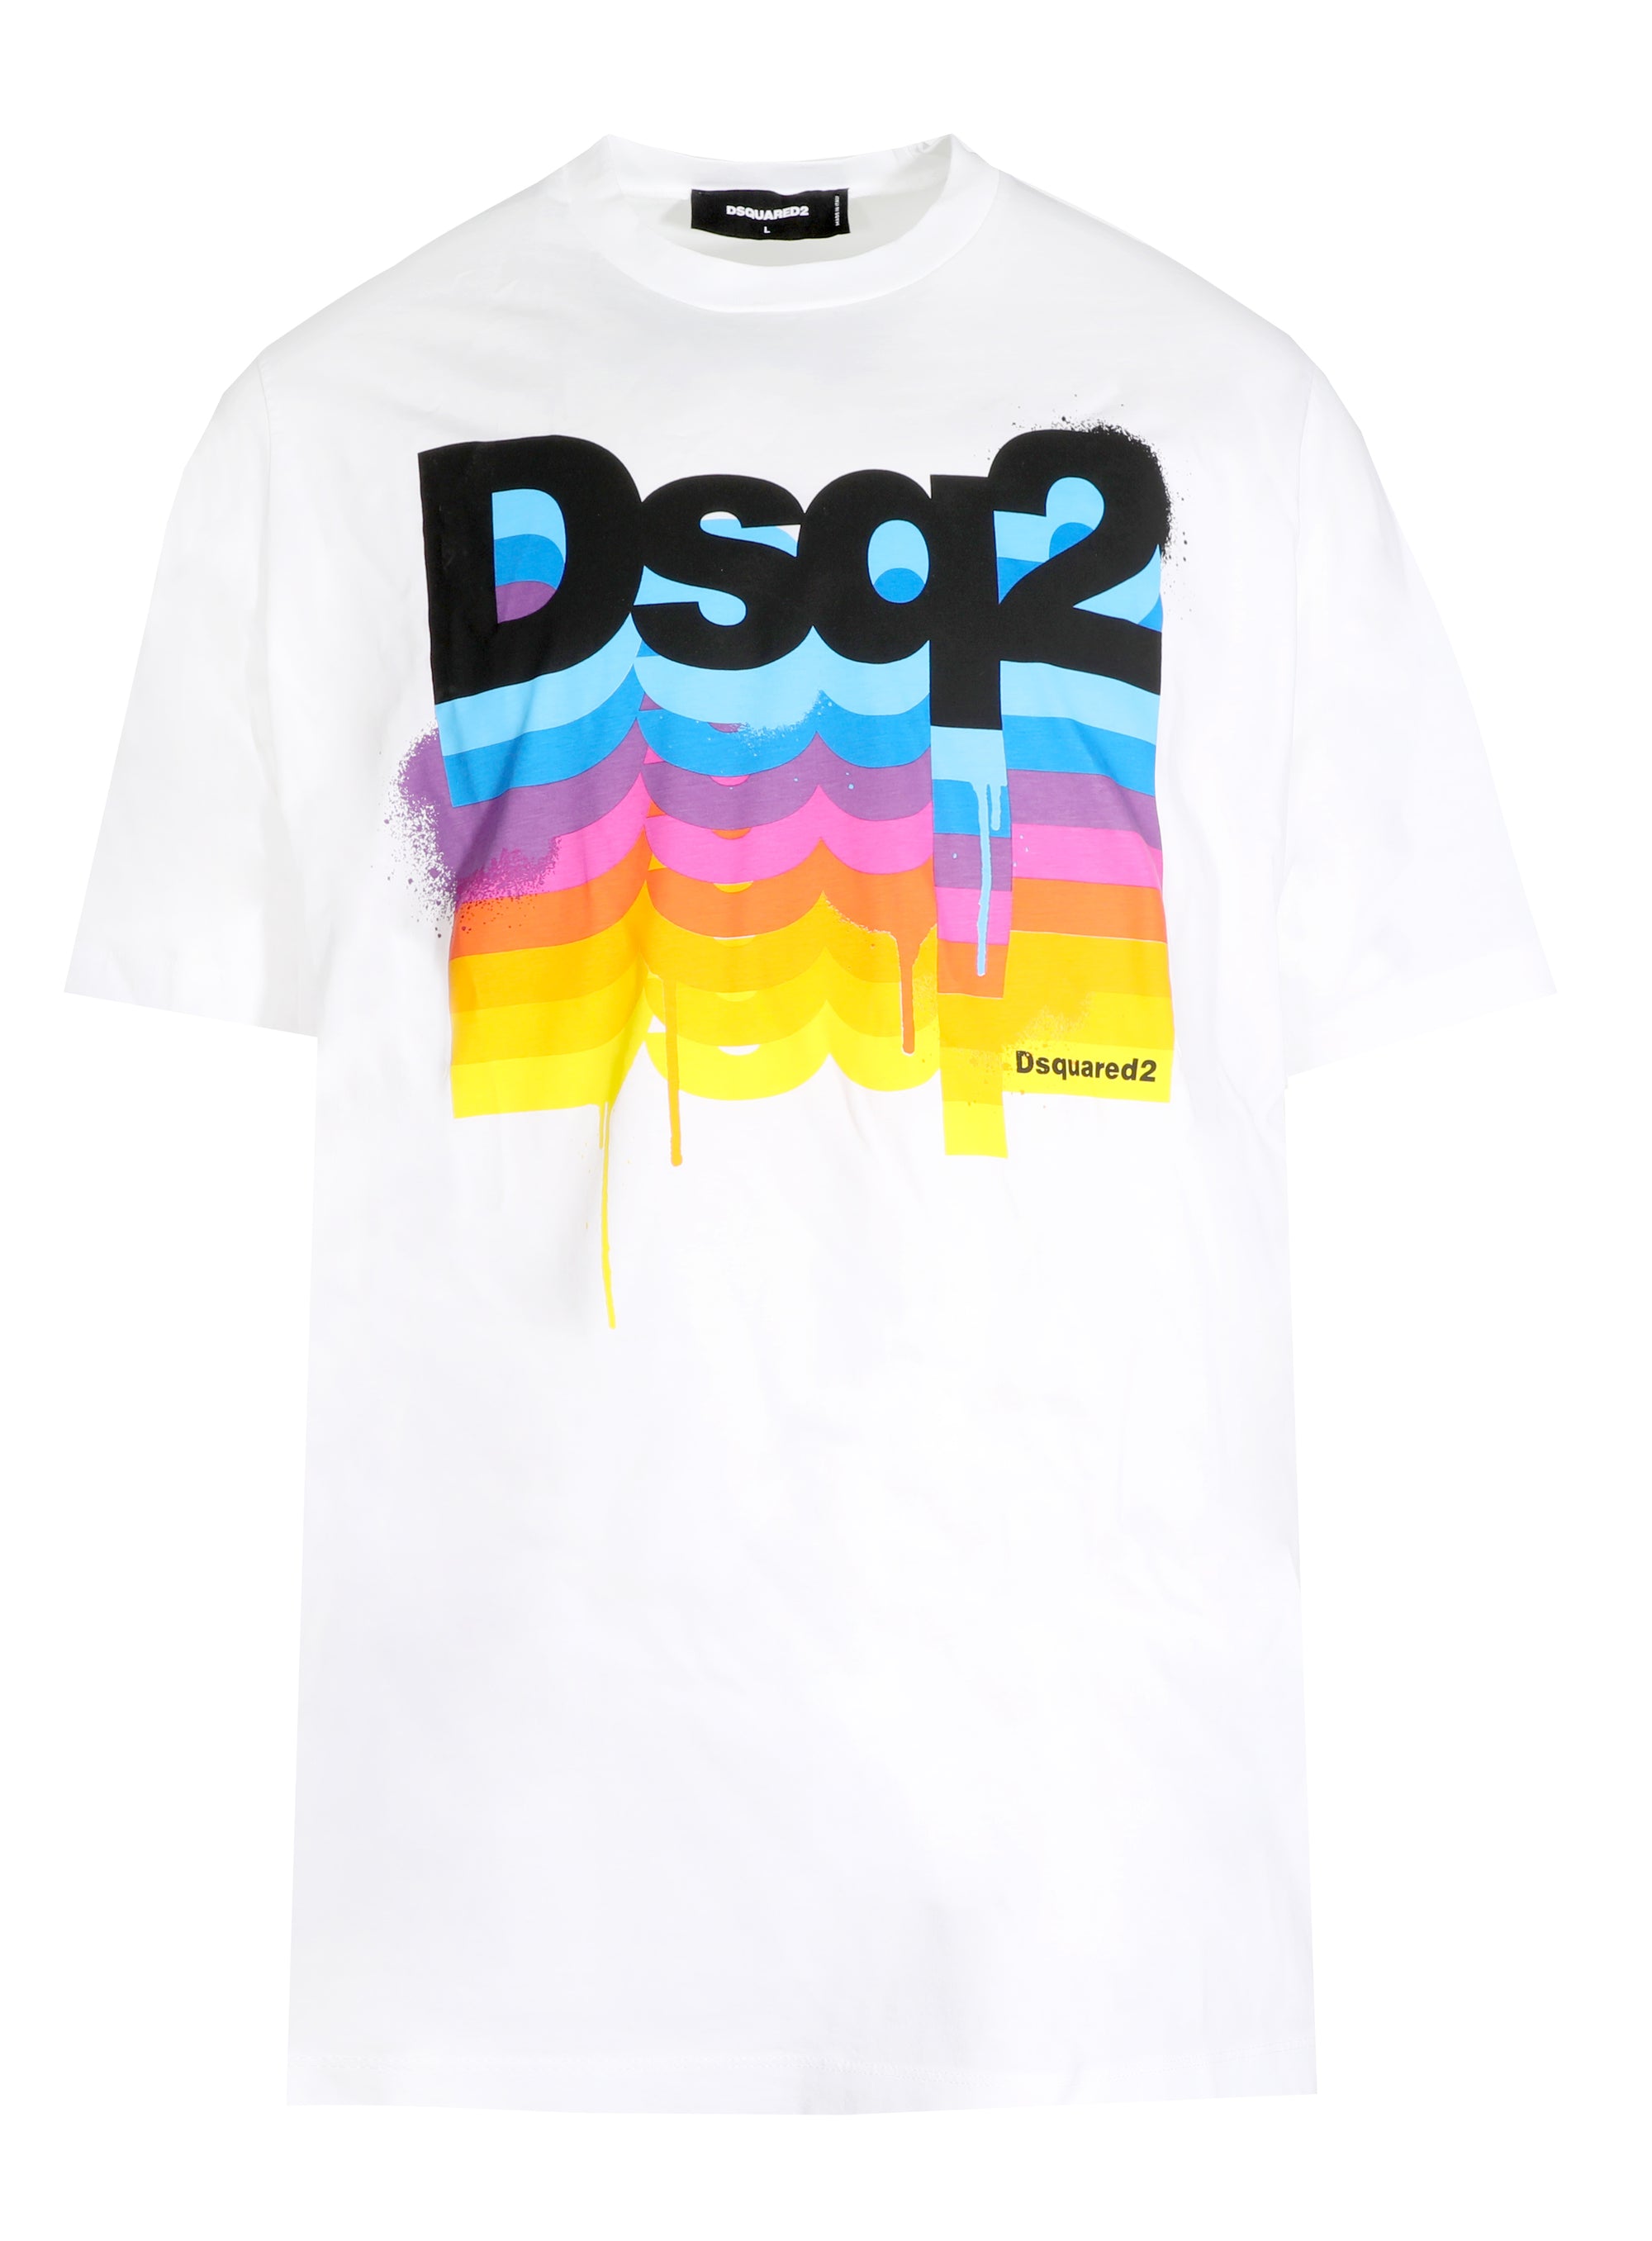 Dsq2 Slouch tee